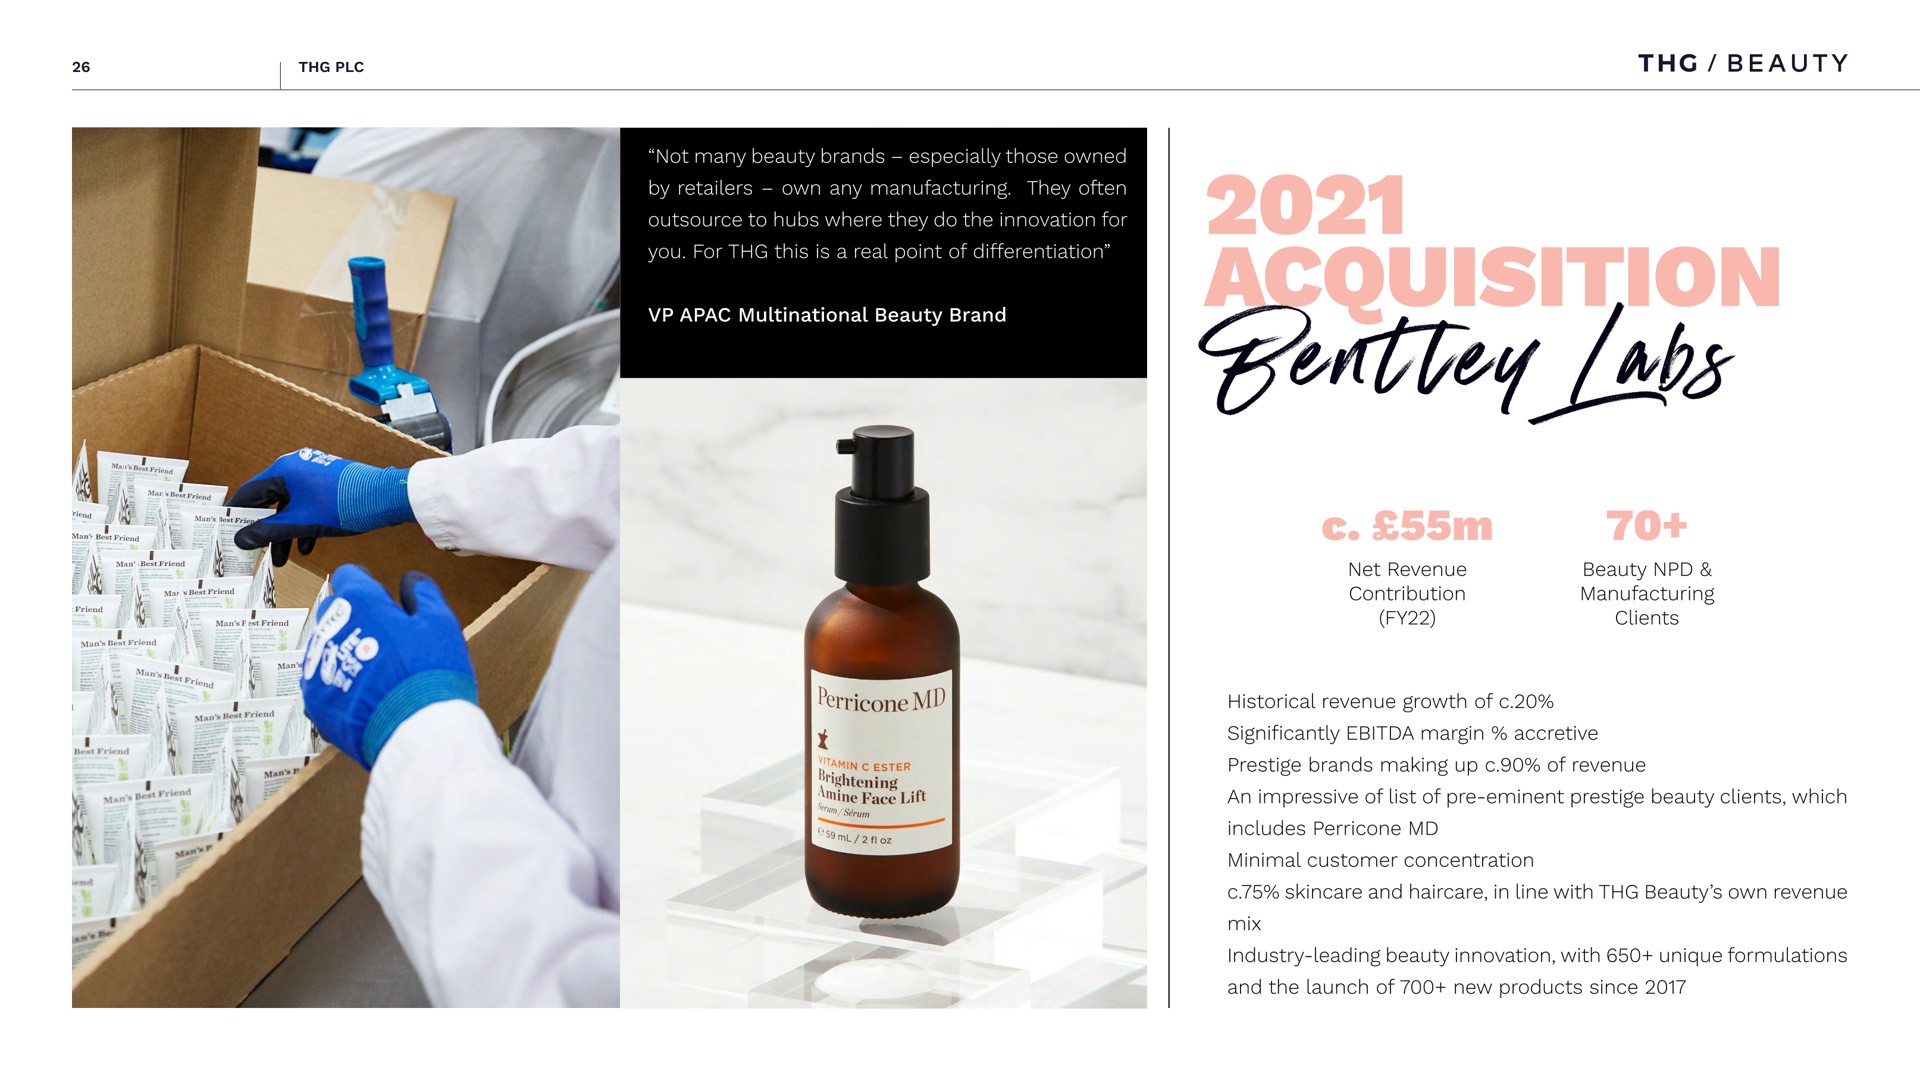 beauty clients industry leading beauty innovation with unique formulations | The Hut Group